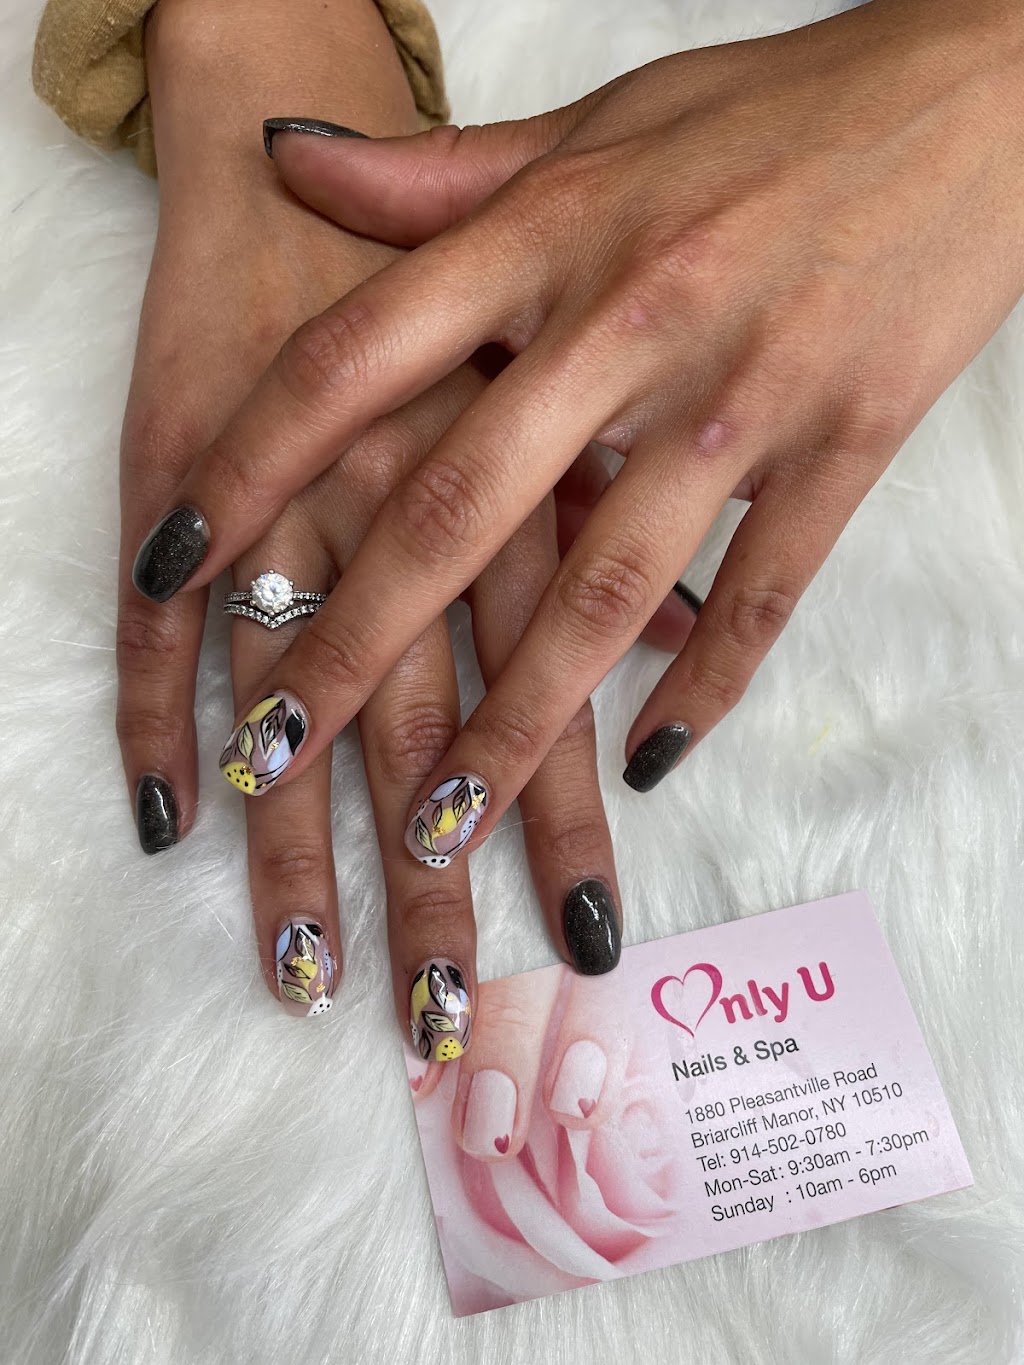 Only U Nail & Spa | 1880 Pleasantville Rd, Briarcliff Manor, NY 10510, USA | Phone: (914) 502-0780